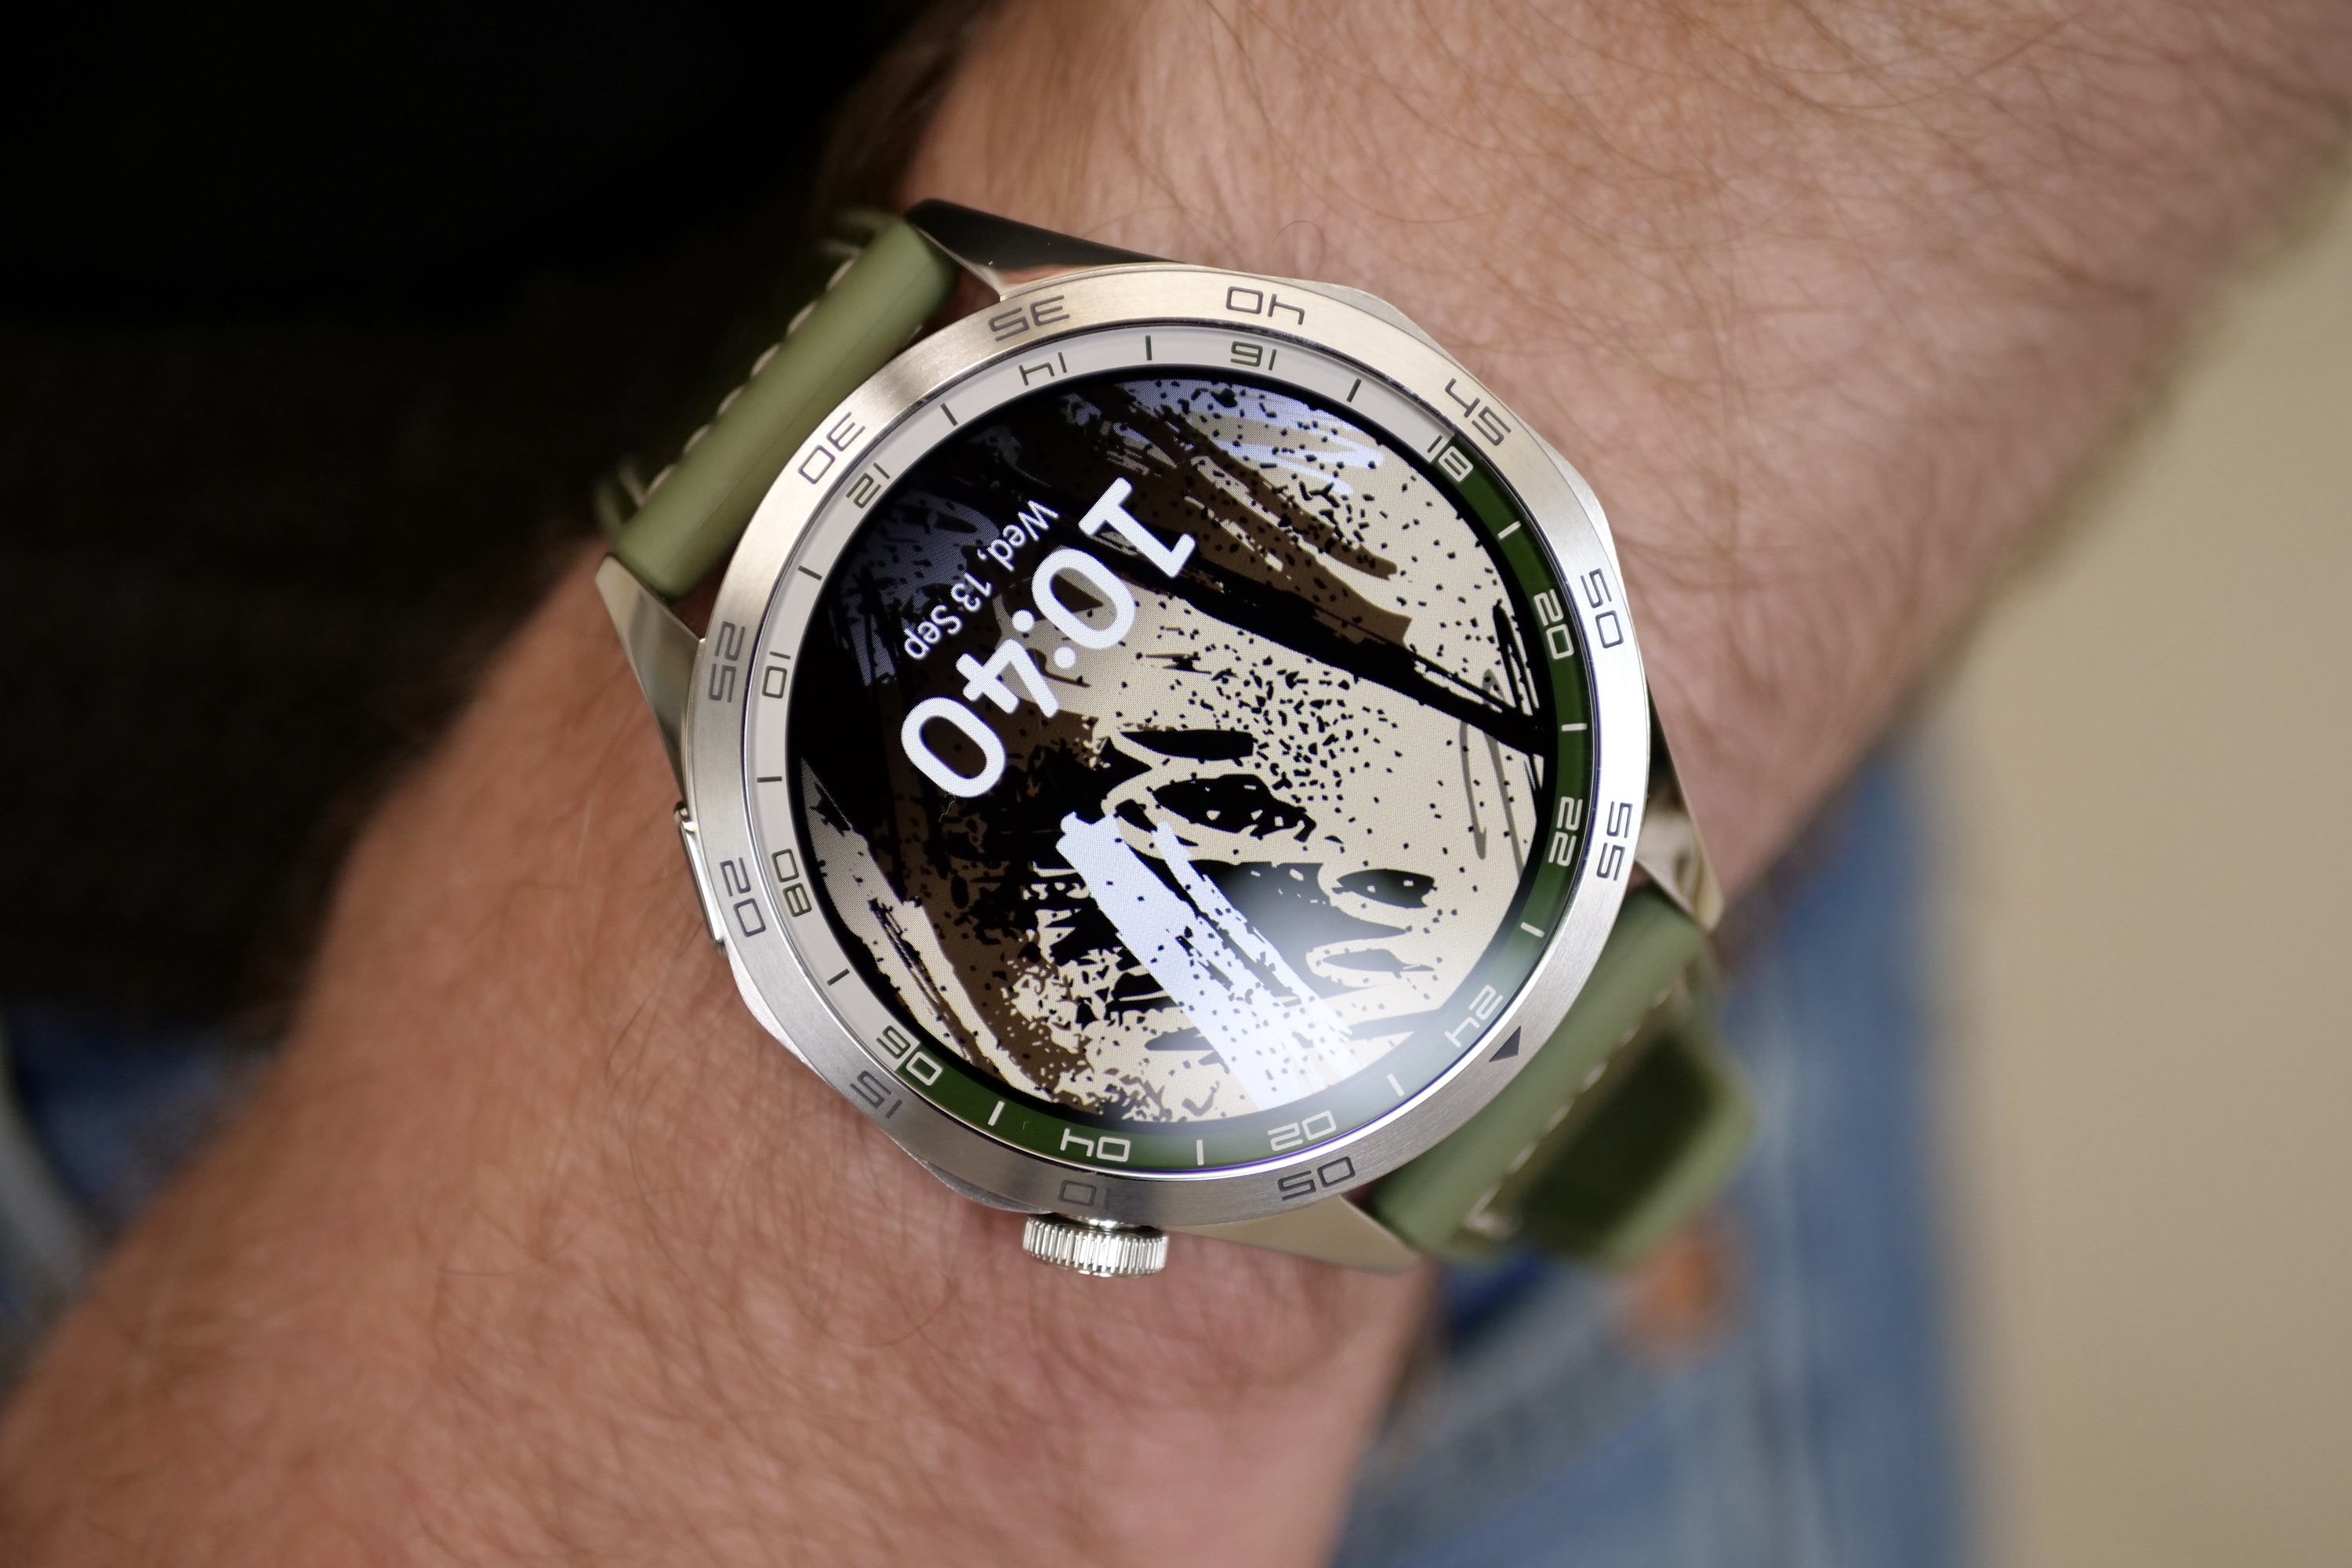 Buy this smartwatch, but only if you own a certain phone | Digital